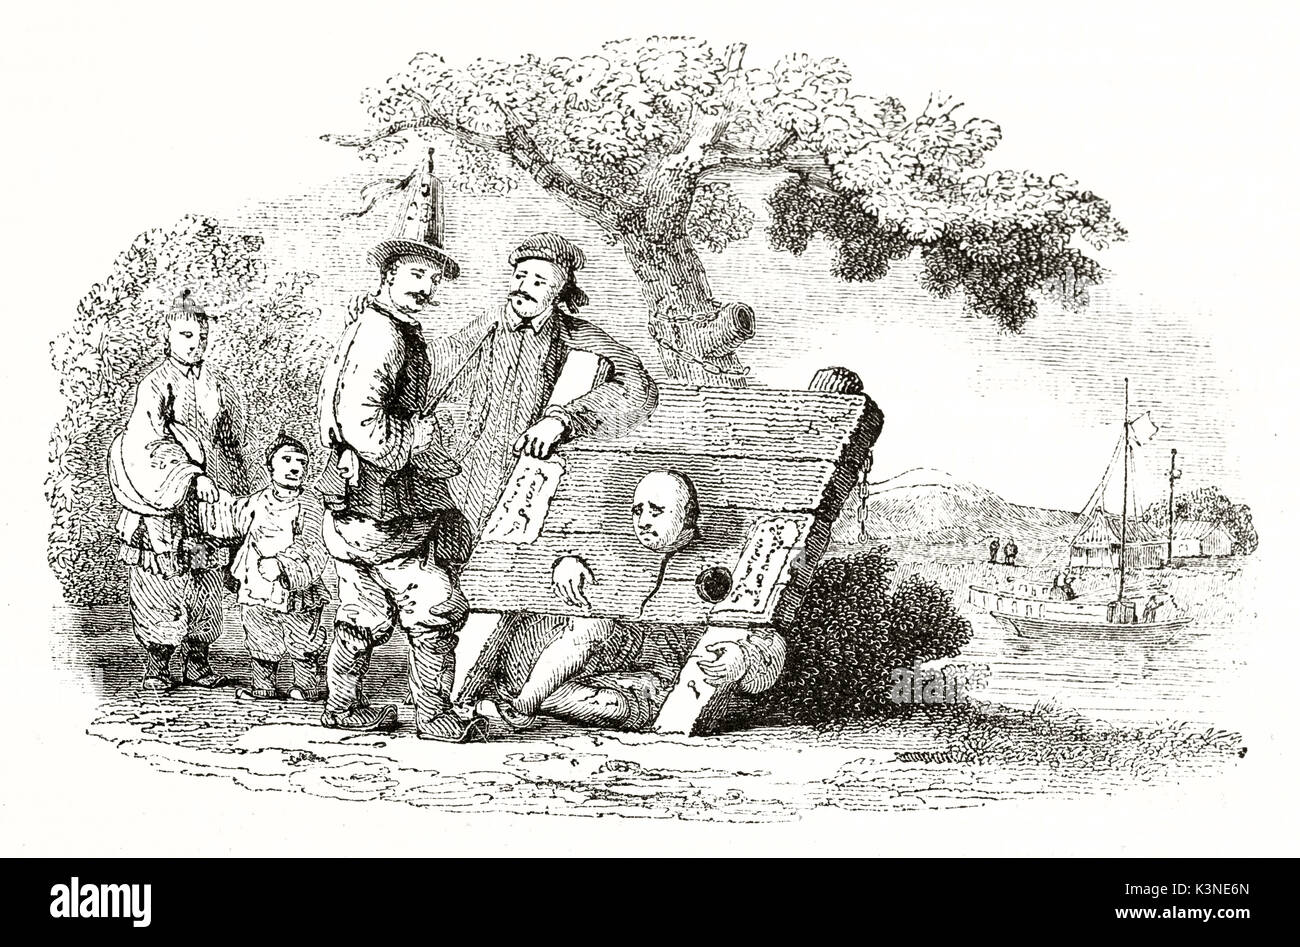 Old illustration of a man suffering the chinese pillory under the view of other people, outdoor. By unidentified author published on Magasin Pittoresque Paris 1839 Stock Photo